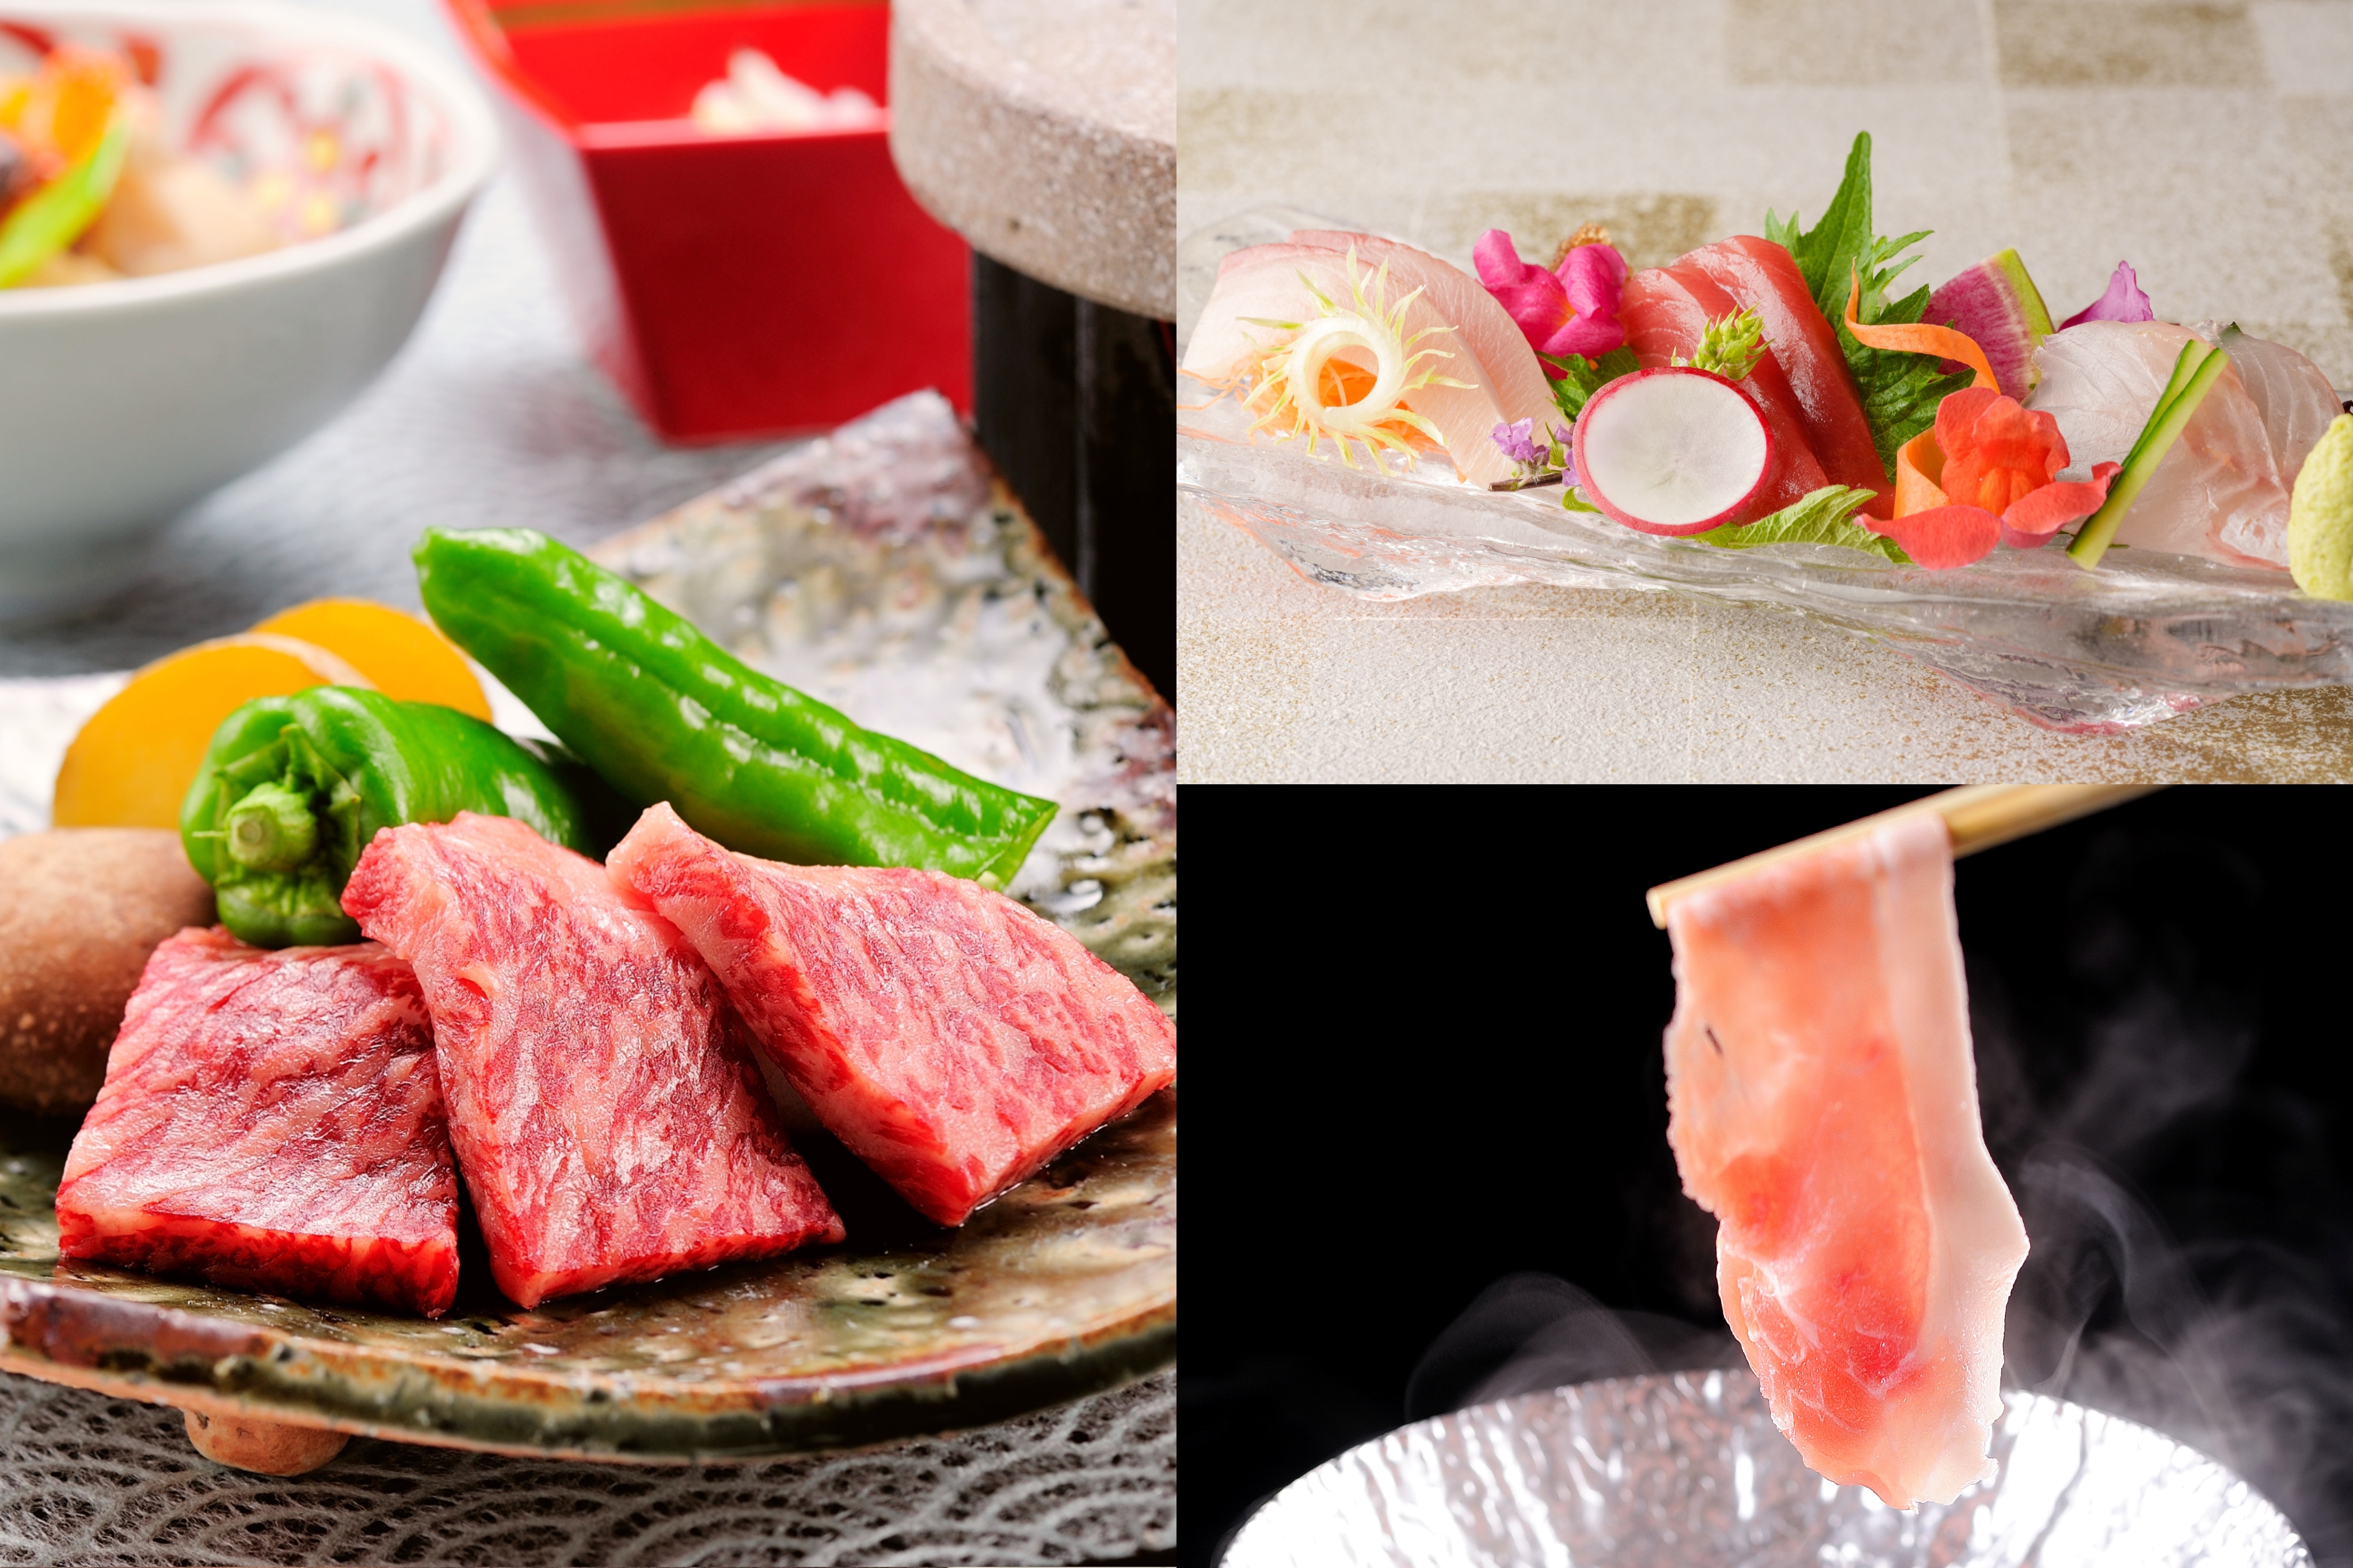 Basic Kaiseki using Niigata beef and Echigo Mochi Pork, a Niigata brand pork that is very popular for being soft and delicious even when cooked *Image